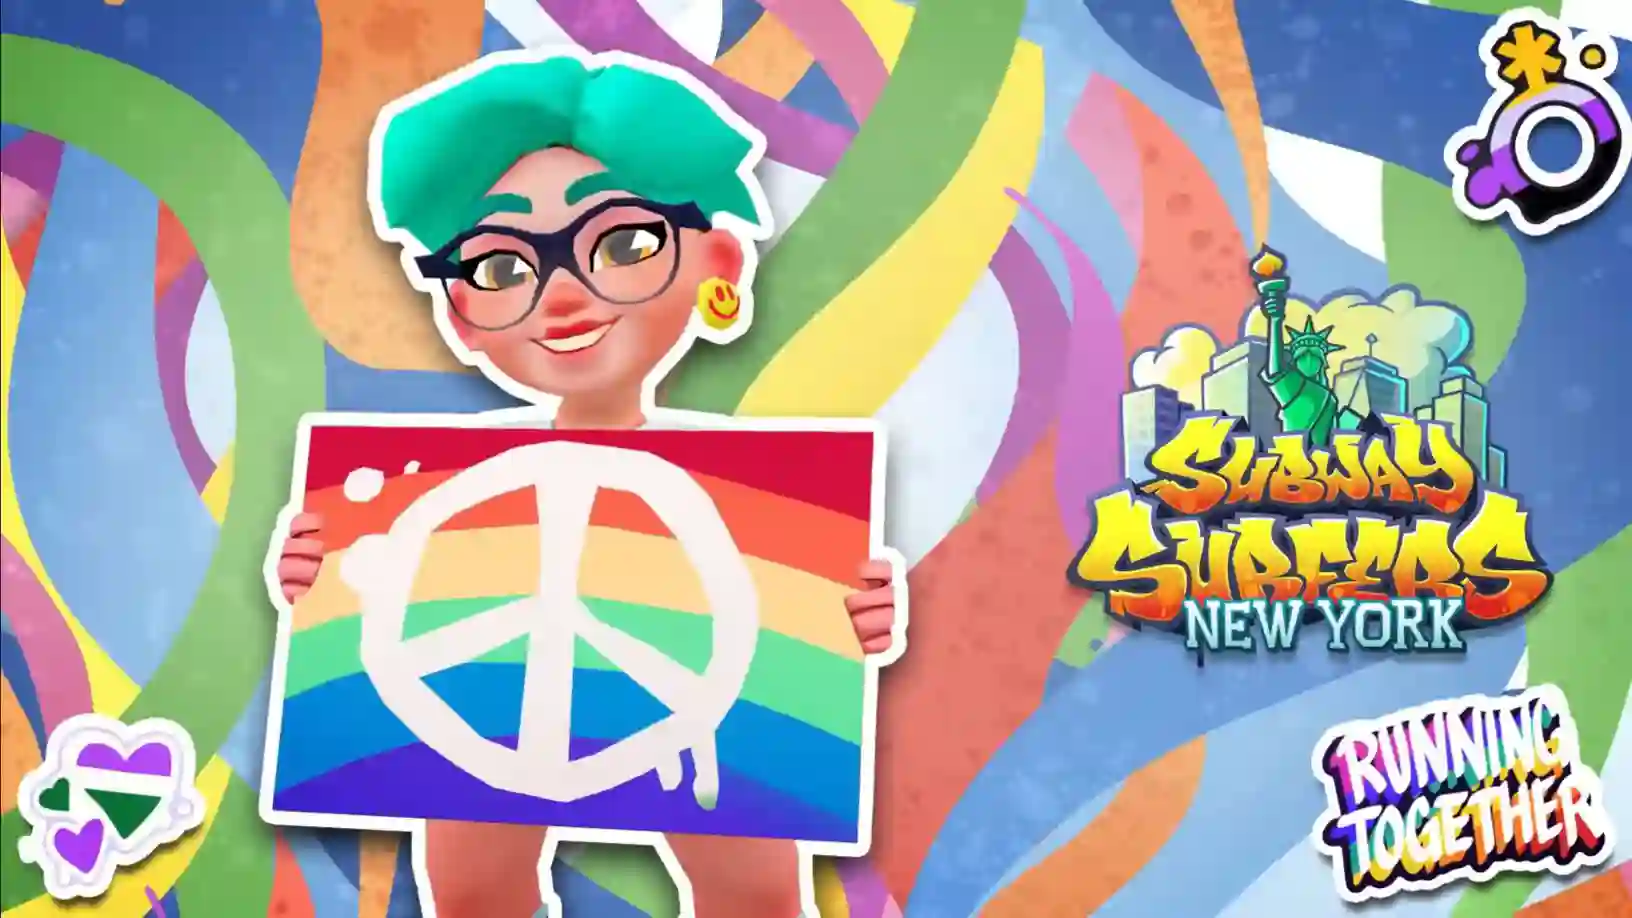 Subway Surfers on X: The Subway Surfers World Tour is excited to run in a  city filled with stories of Pride, New York! 🏳️‍🌈 Join in on all the fun  with our